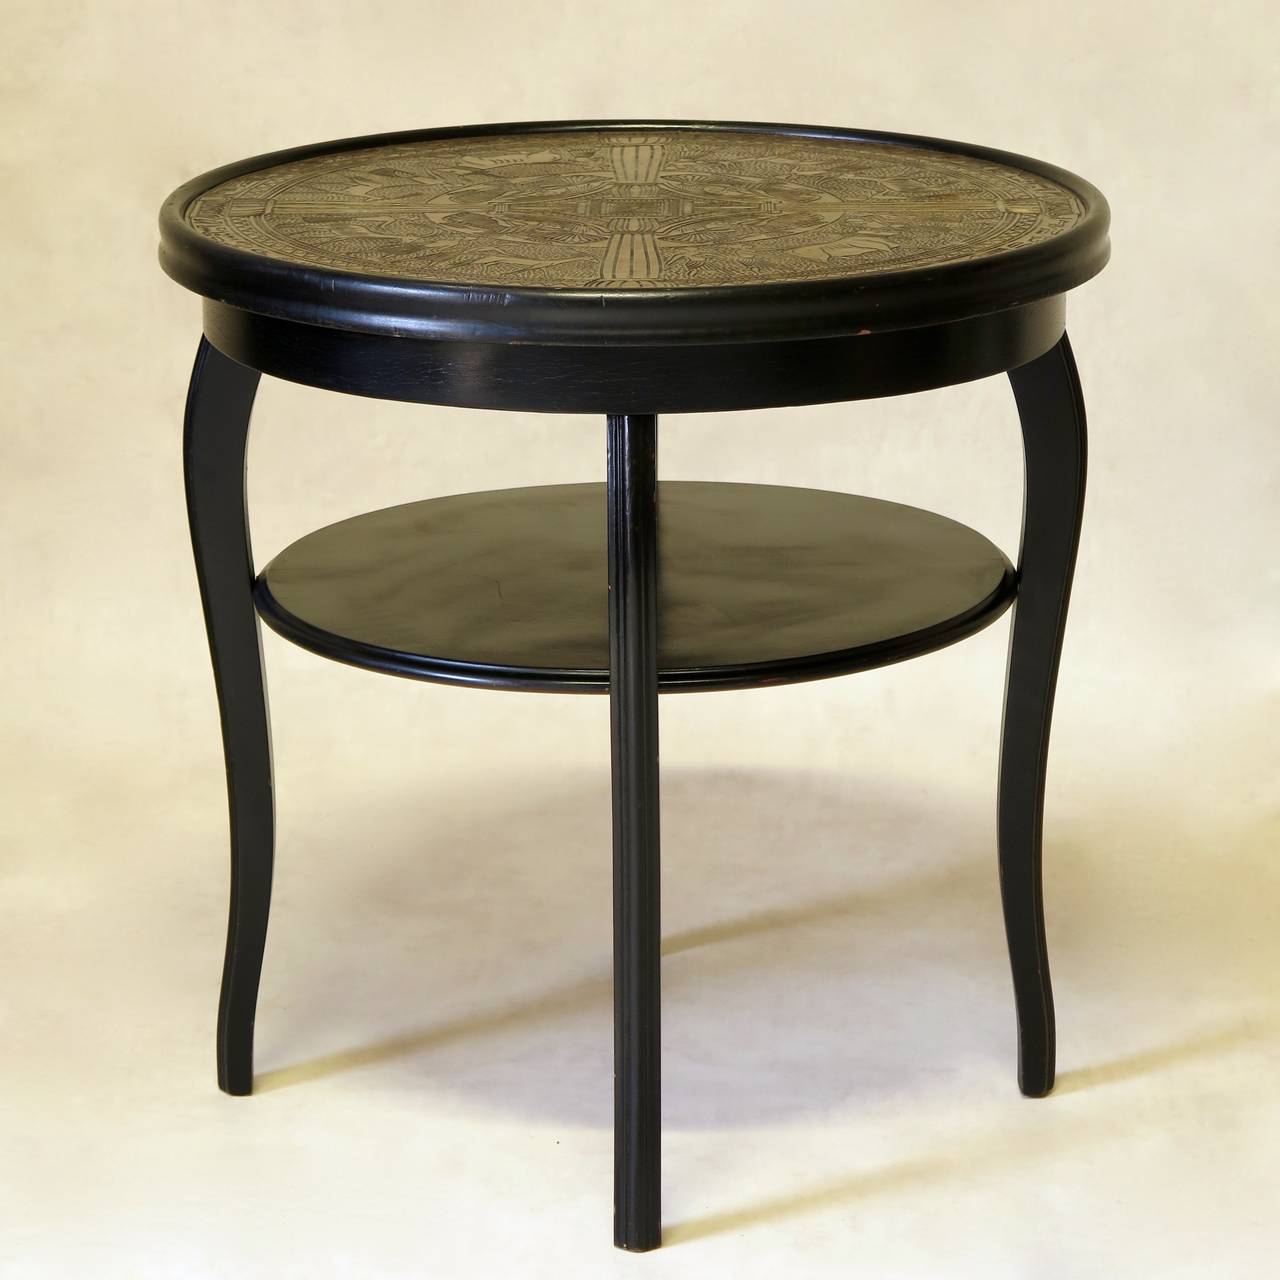 Chic two-tiered round side table with an ebonised wood structure. The top is of repoussé copper with an egyptian-inspired motif.

Possibly Austrian (Thonet).